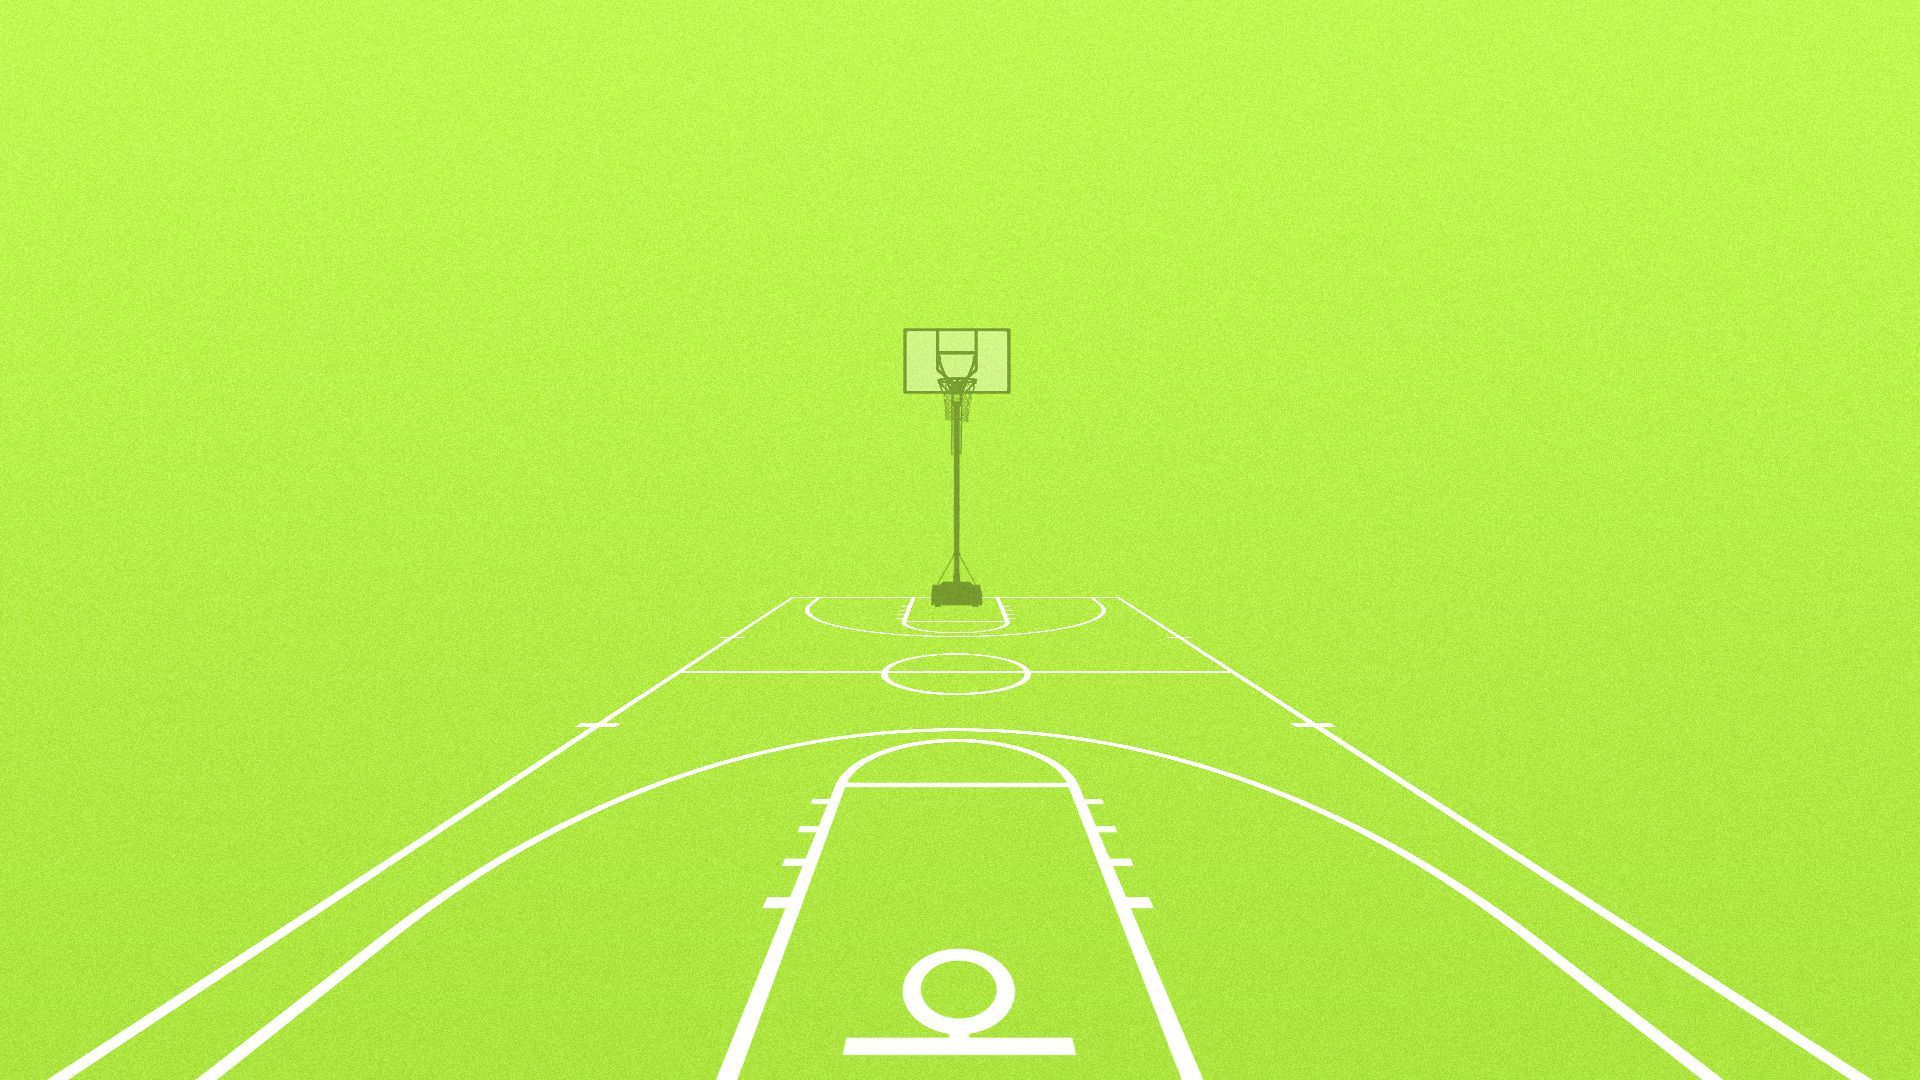 Illustration of a basketball court